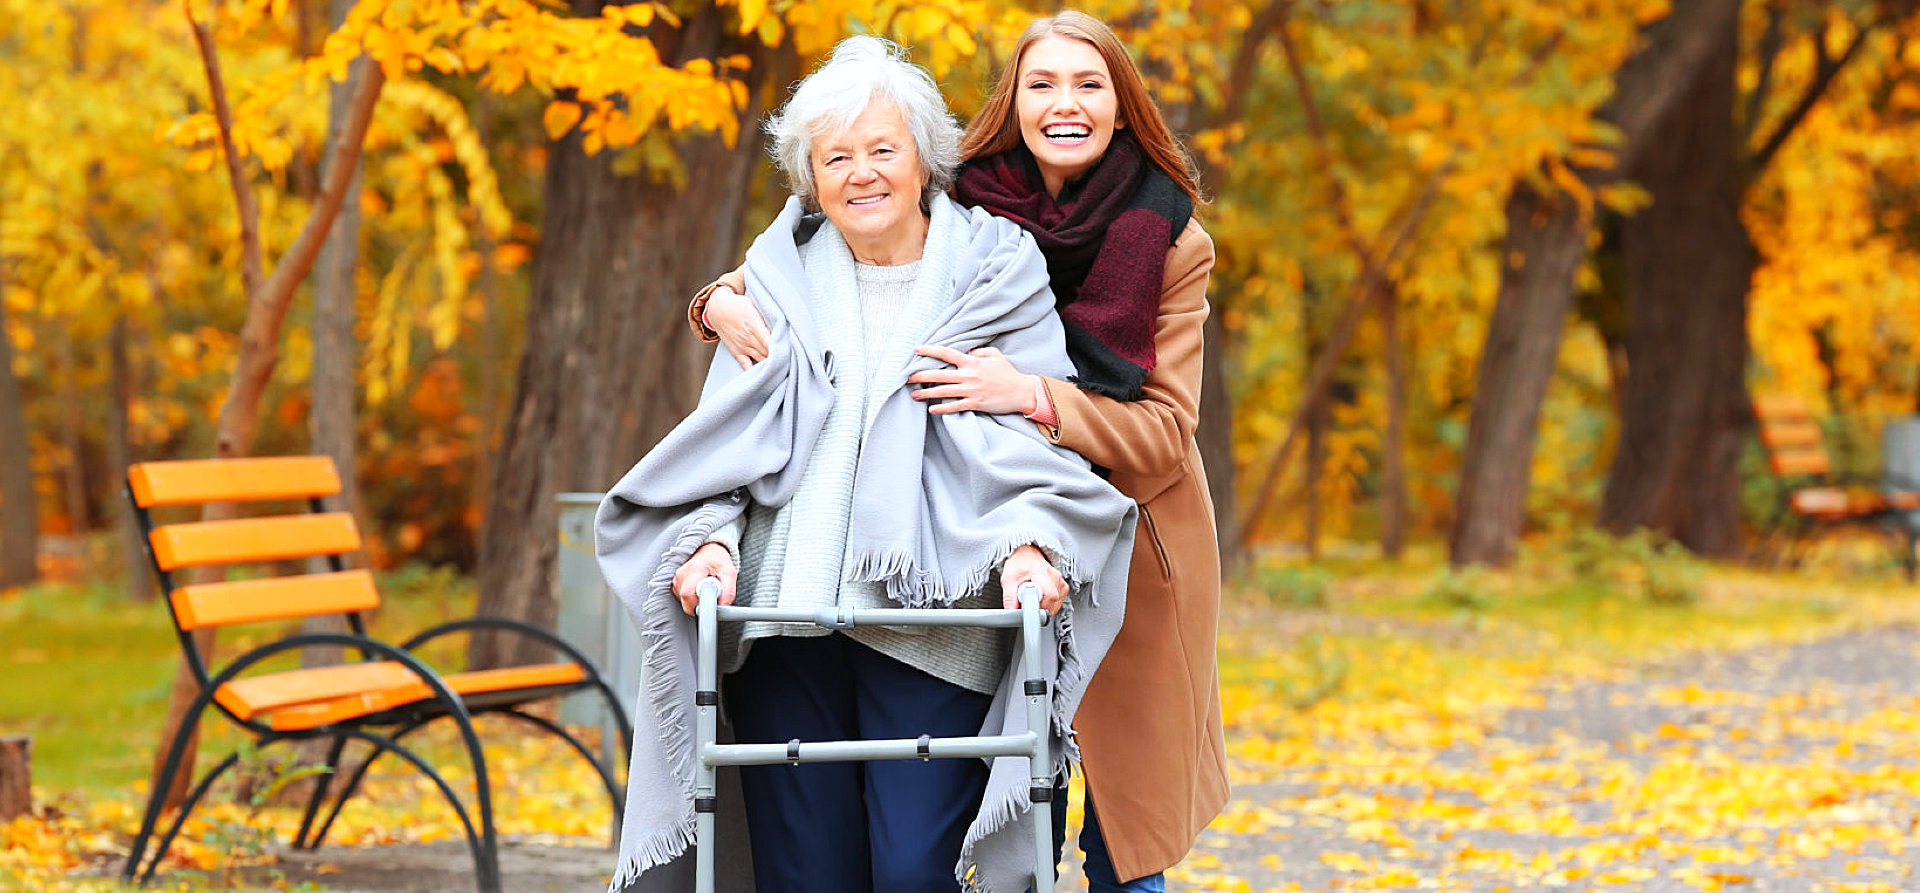 caregiver assisting senior woman to stand while smiling